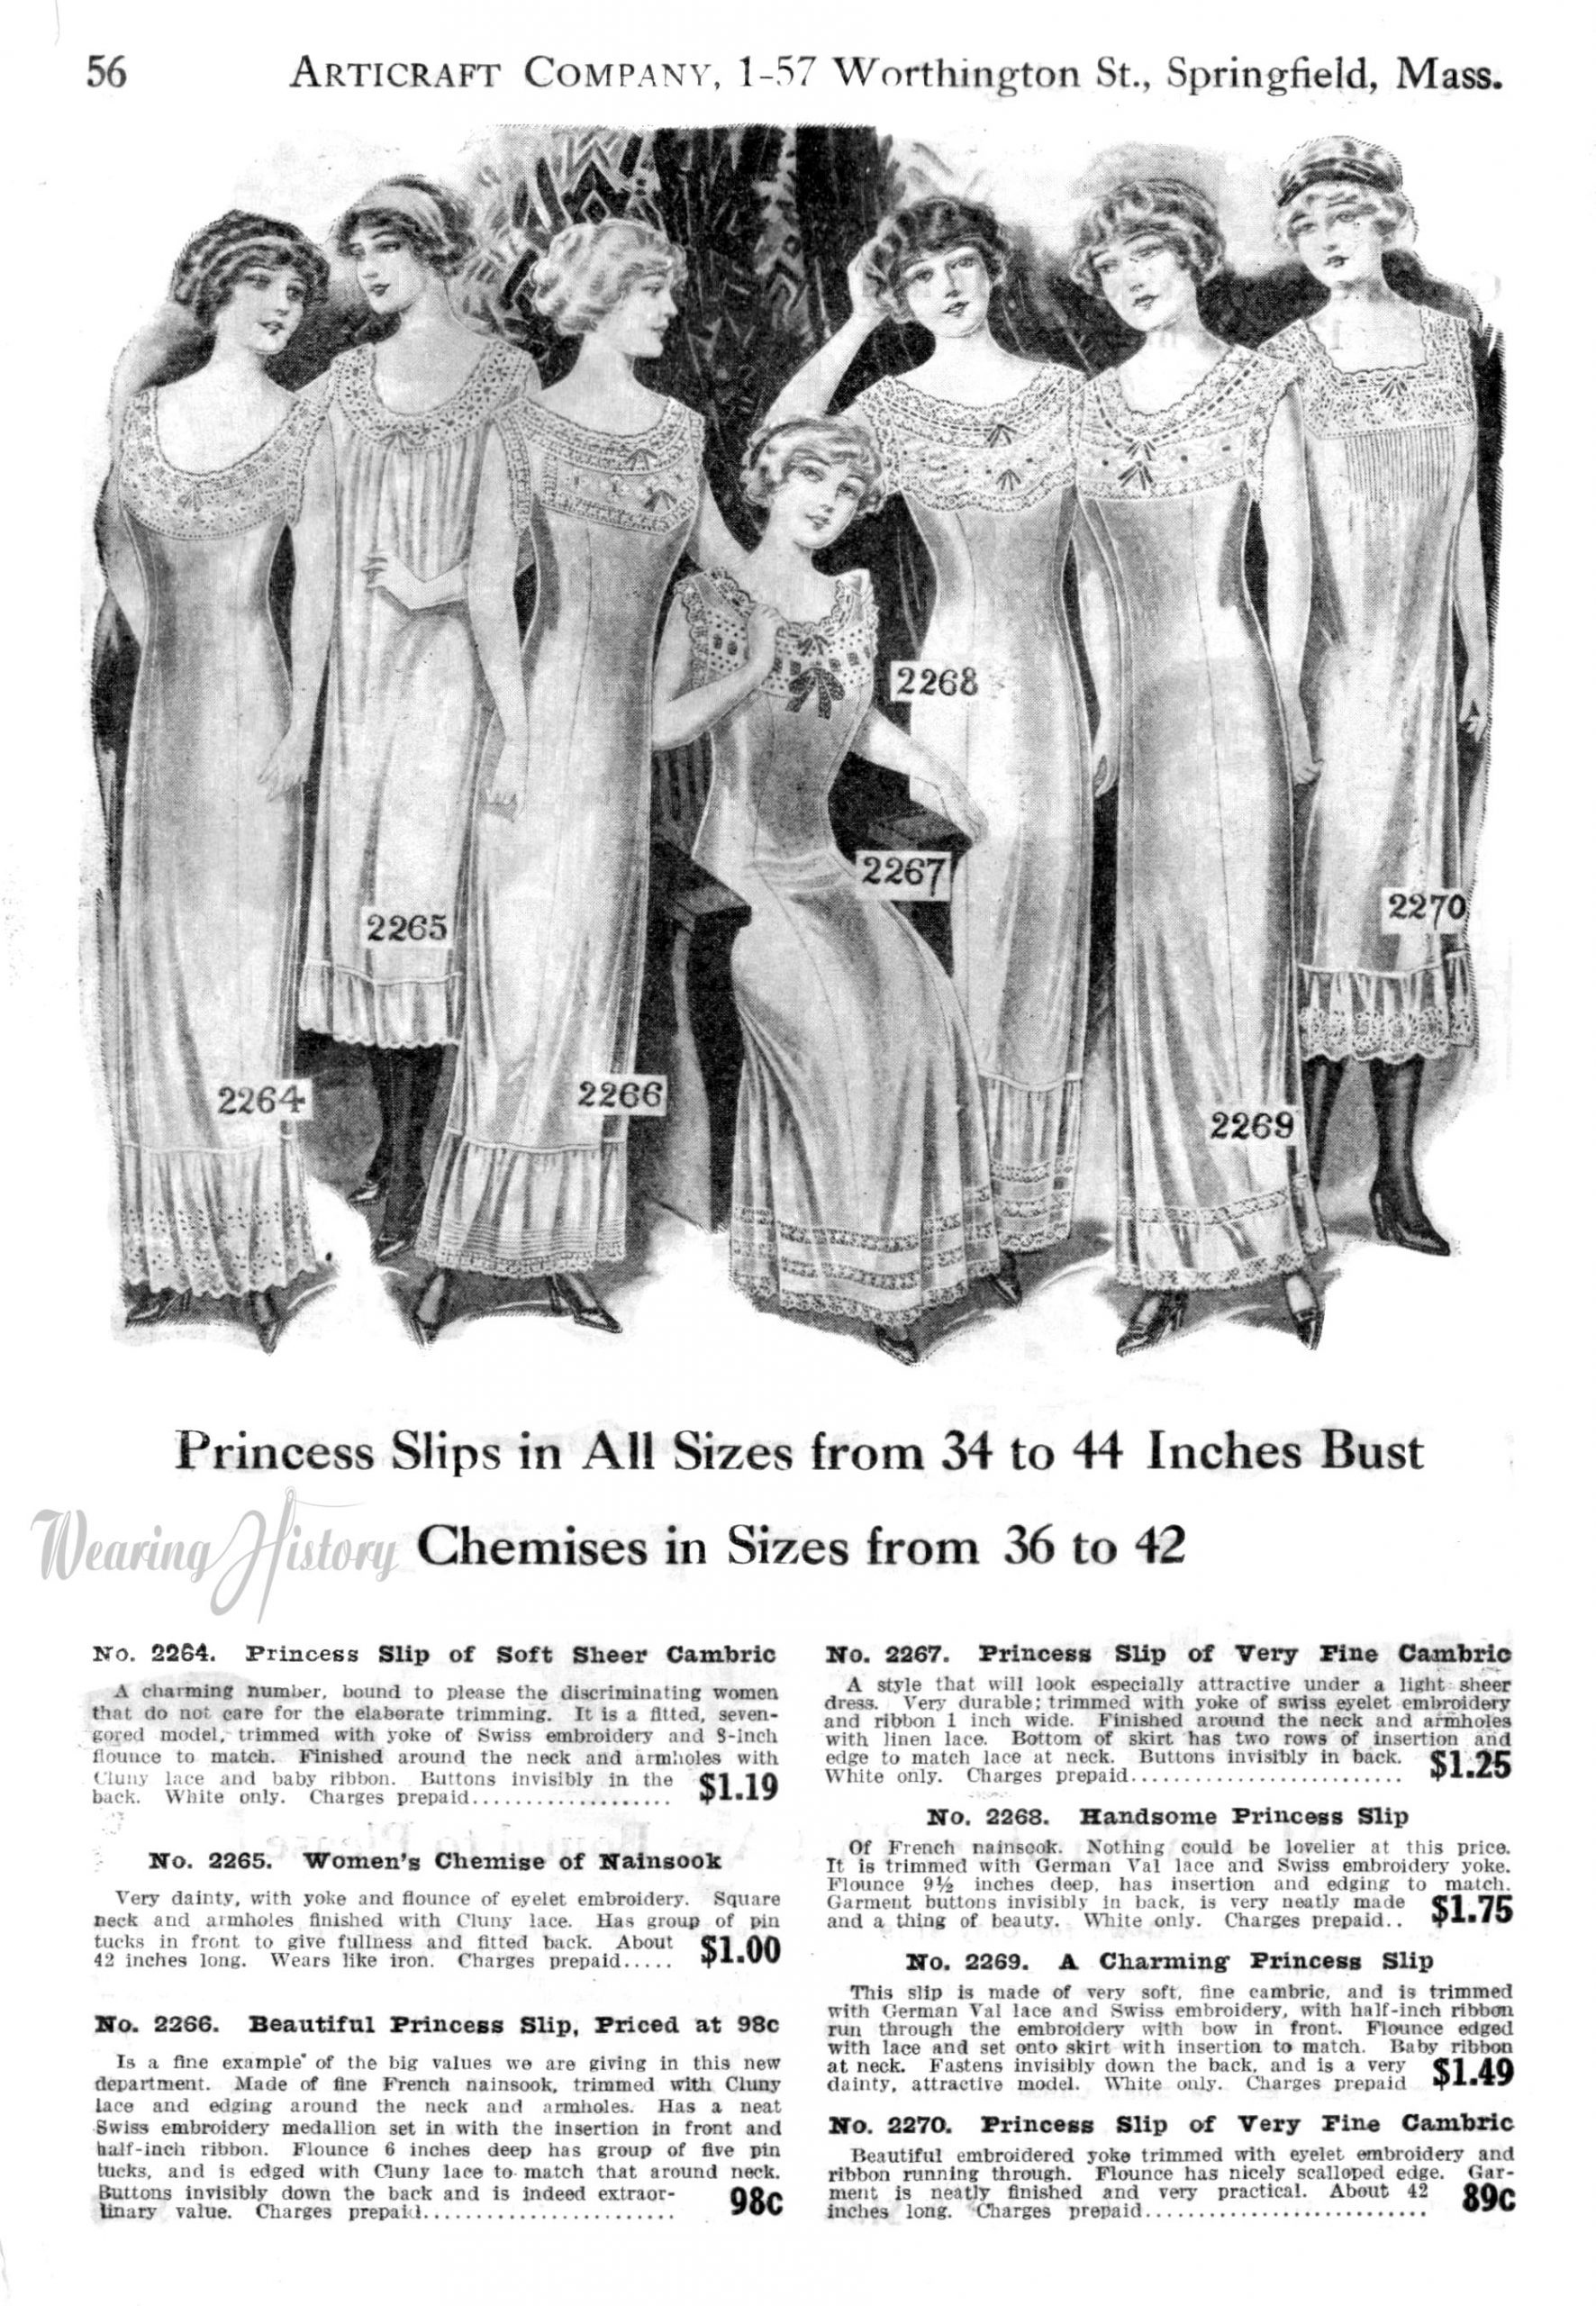 1914- Knit and Woven Combinations, Princess Slips, and More Notes